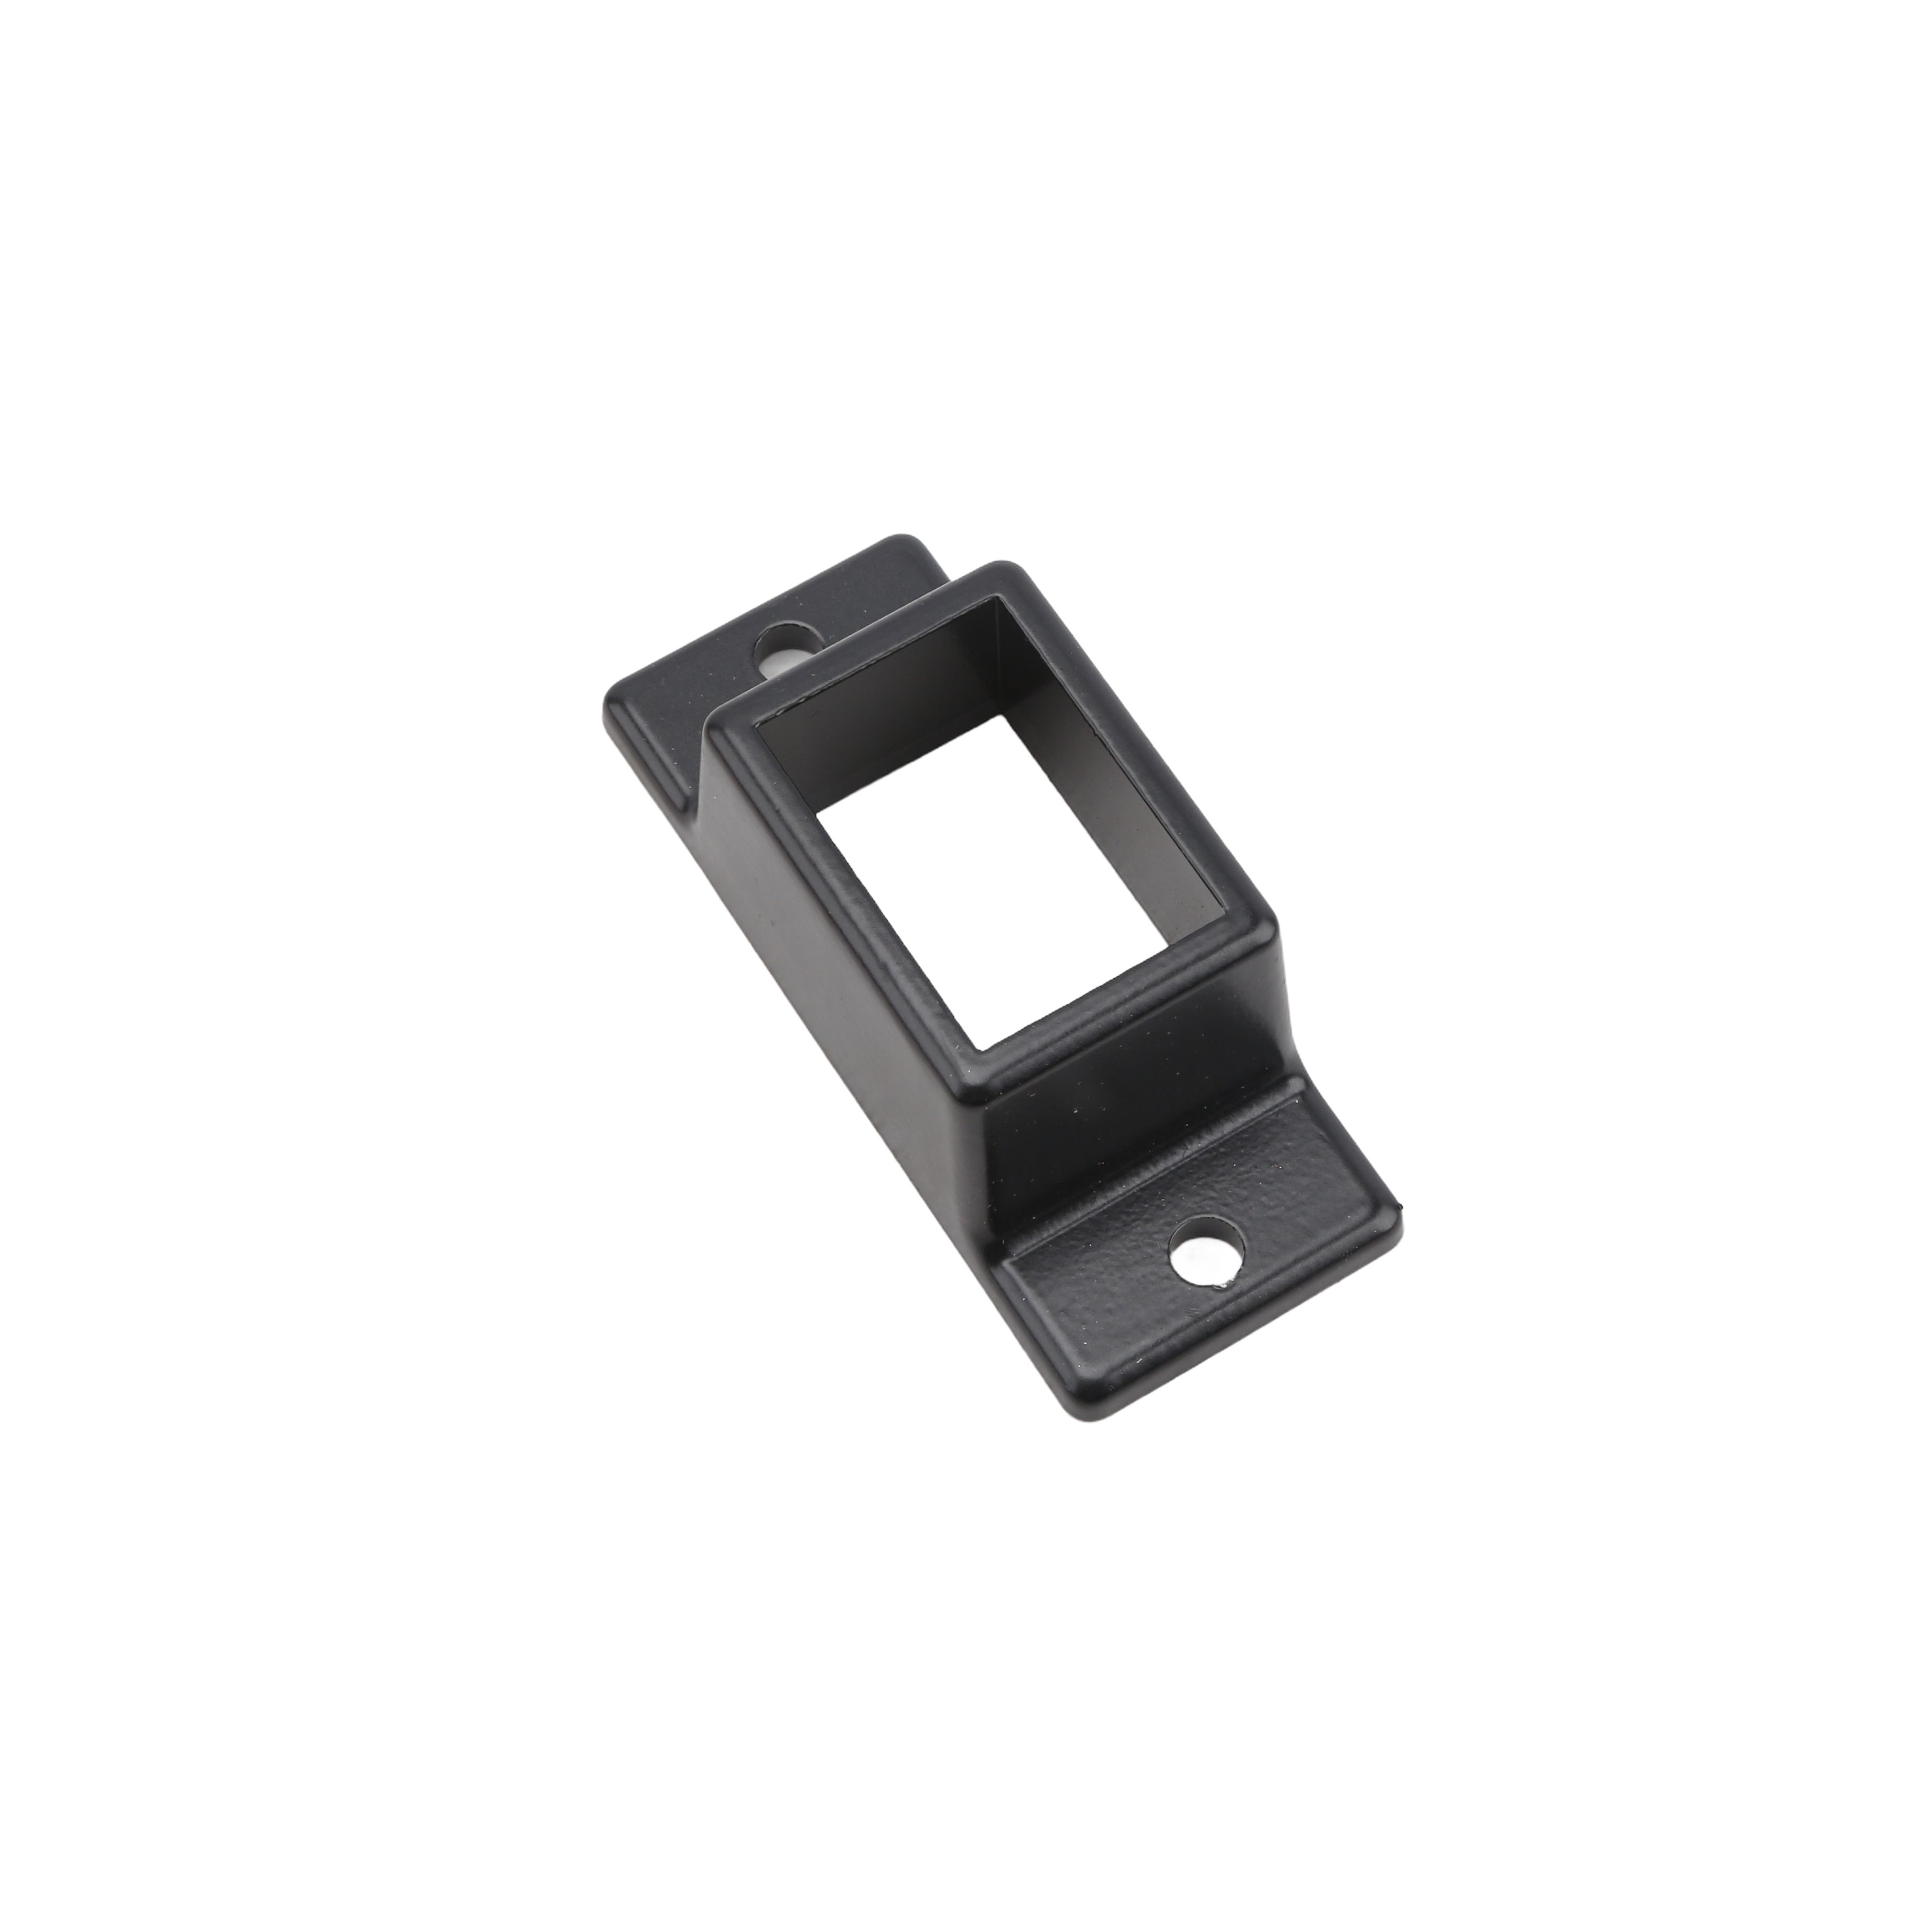 Aluminum Fence Stationary Wall Mount Bracket 1 W x 1 1/2 H - Commercial (Black)